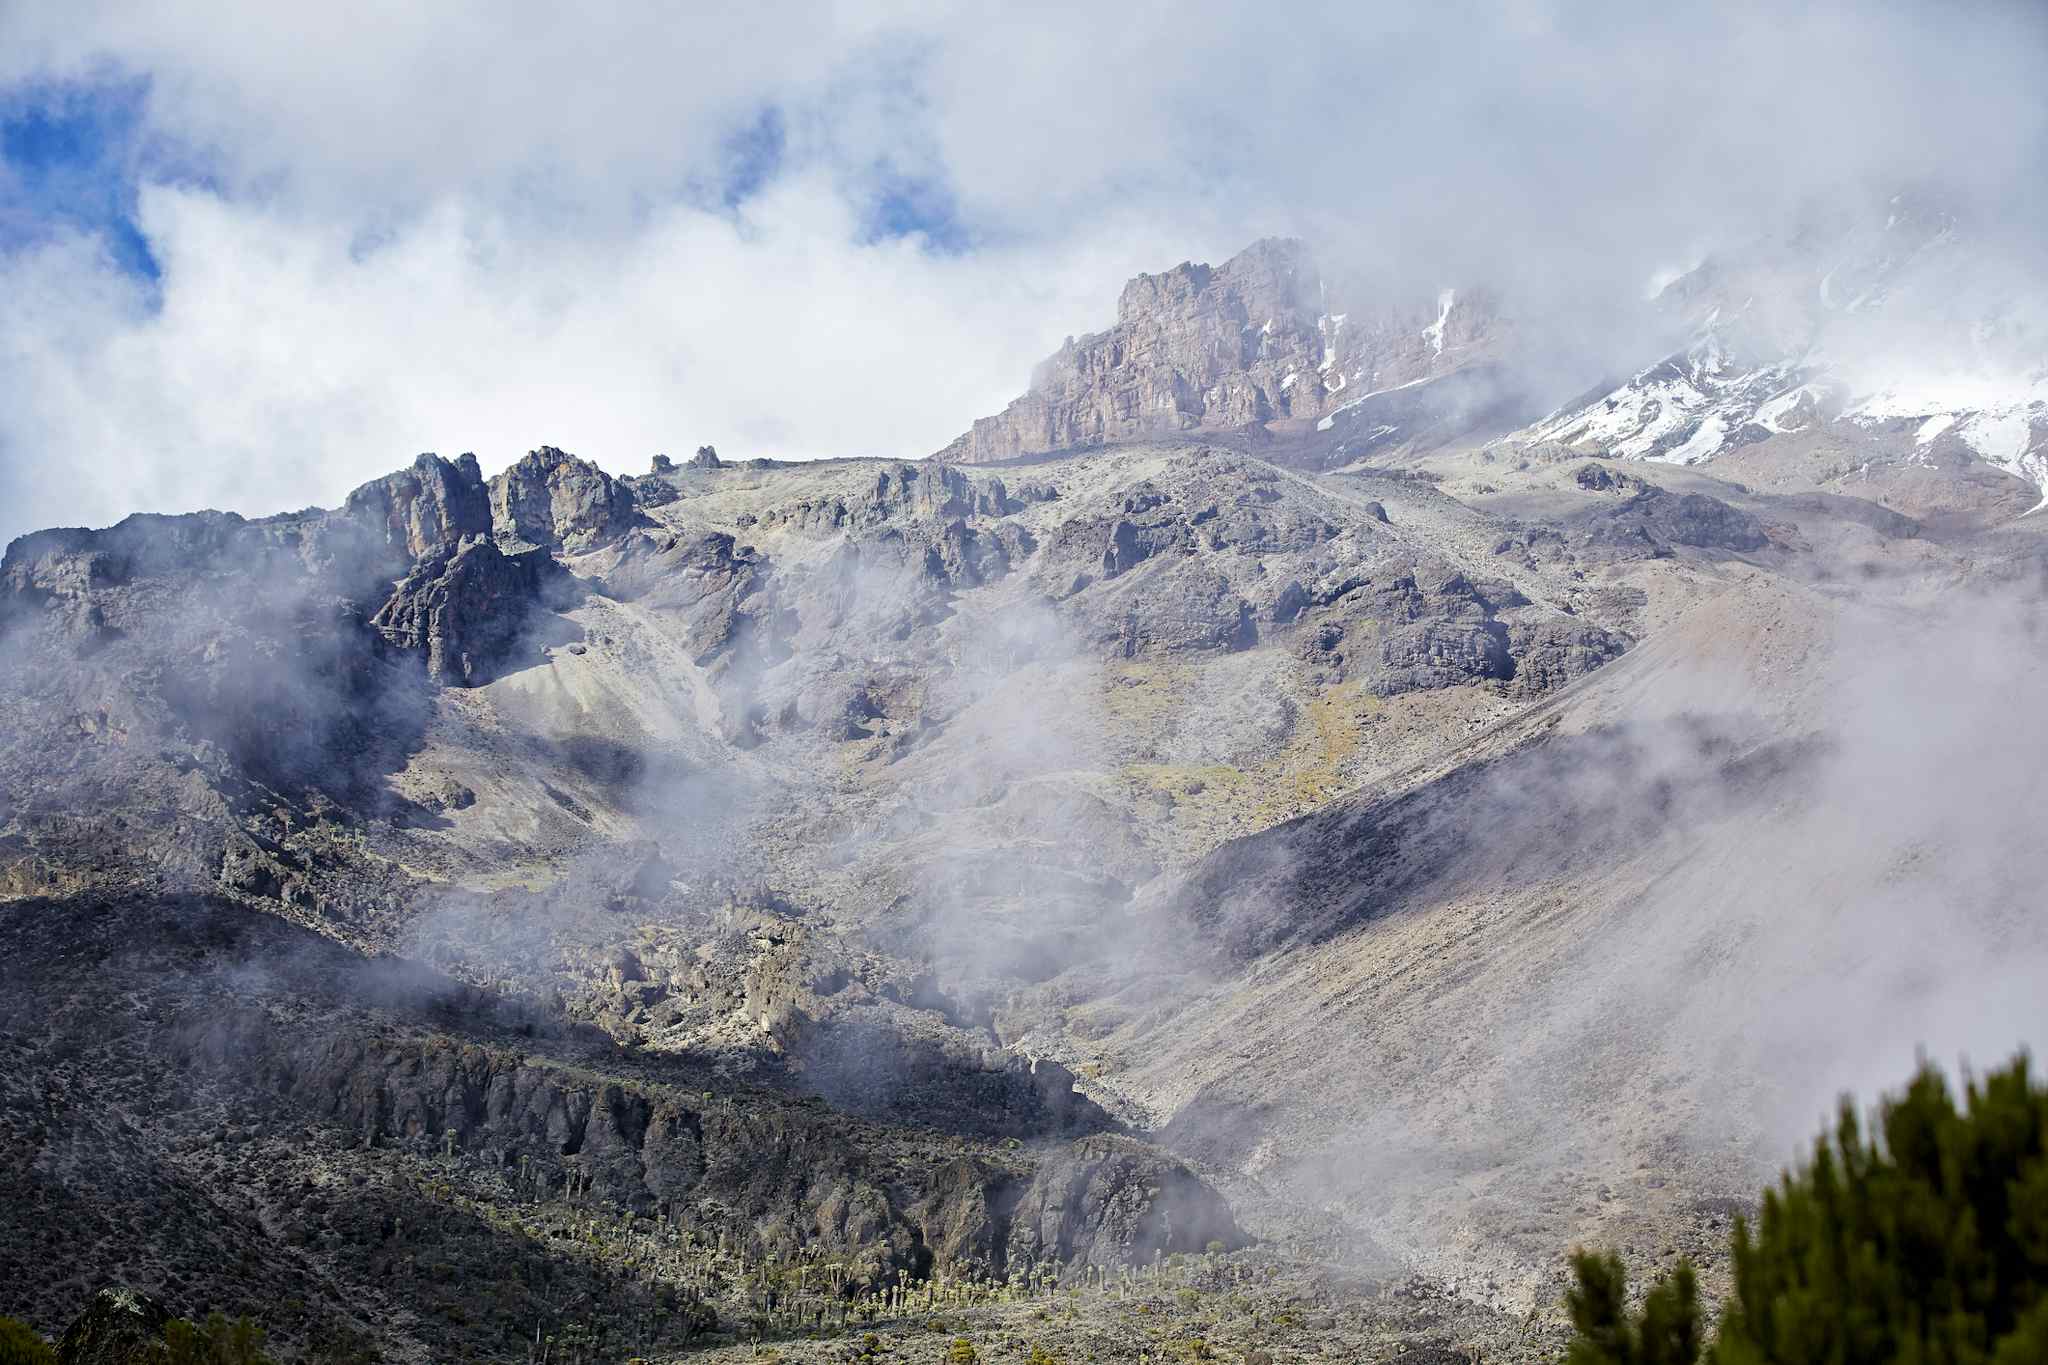 Barranco Wall, on the Machame Route up Mount Kilimanjaro, Tanzania. Photo: GettyImages-475176312